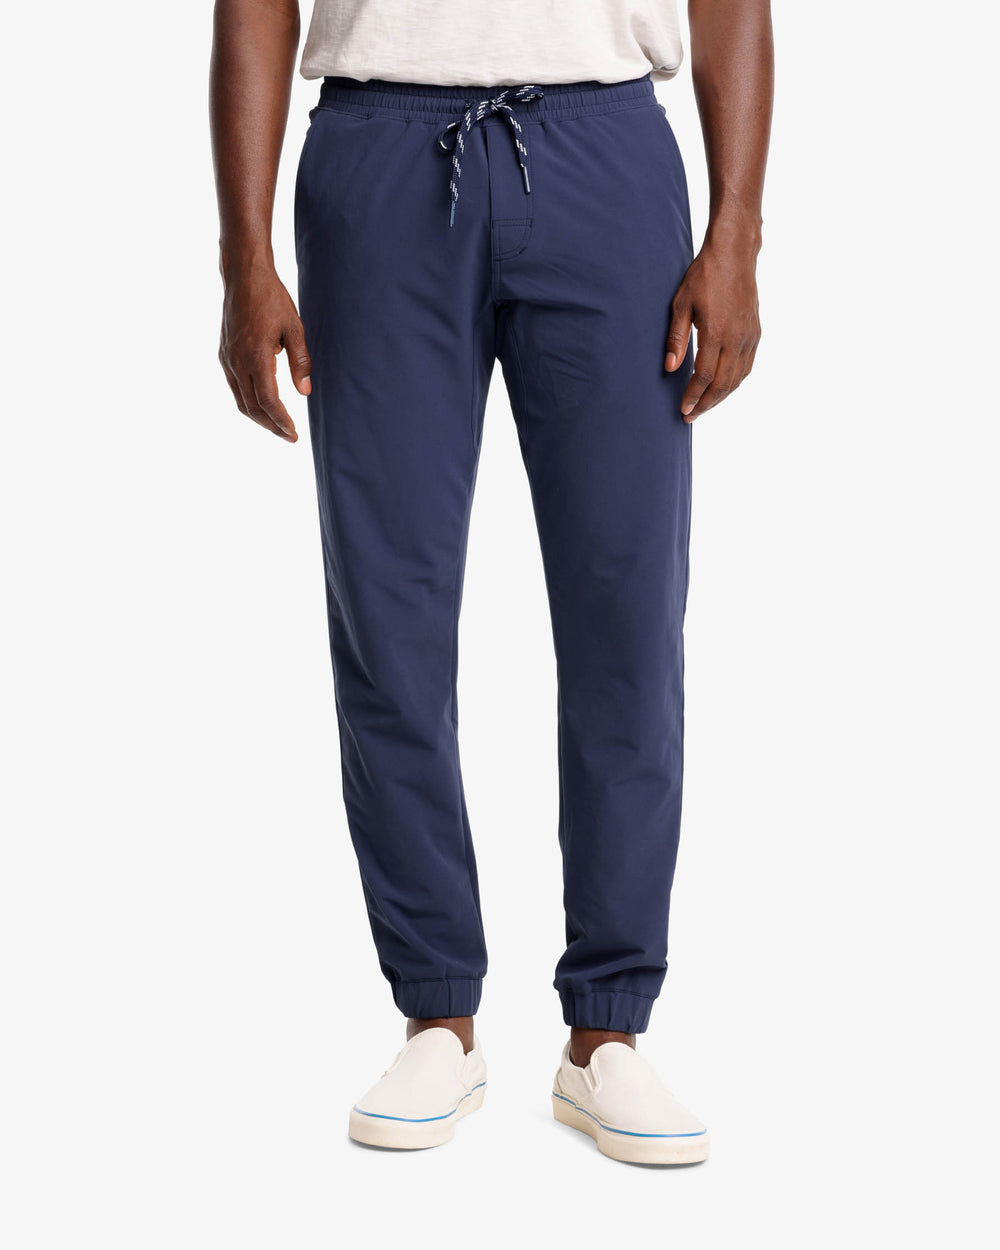 The front view of the The Excursion Performance Jogger by Southern Tide - True Navy